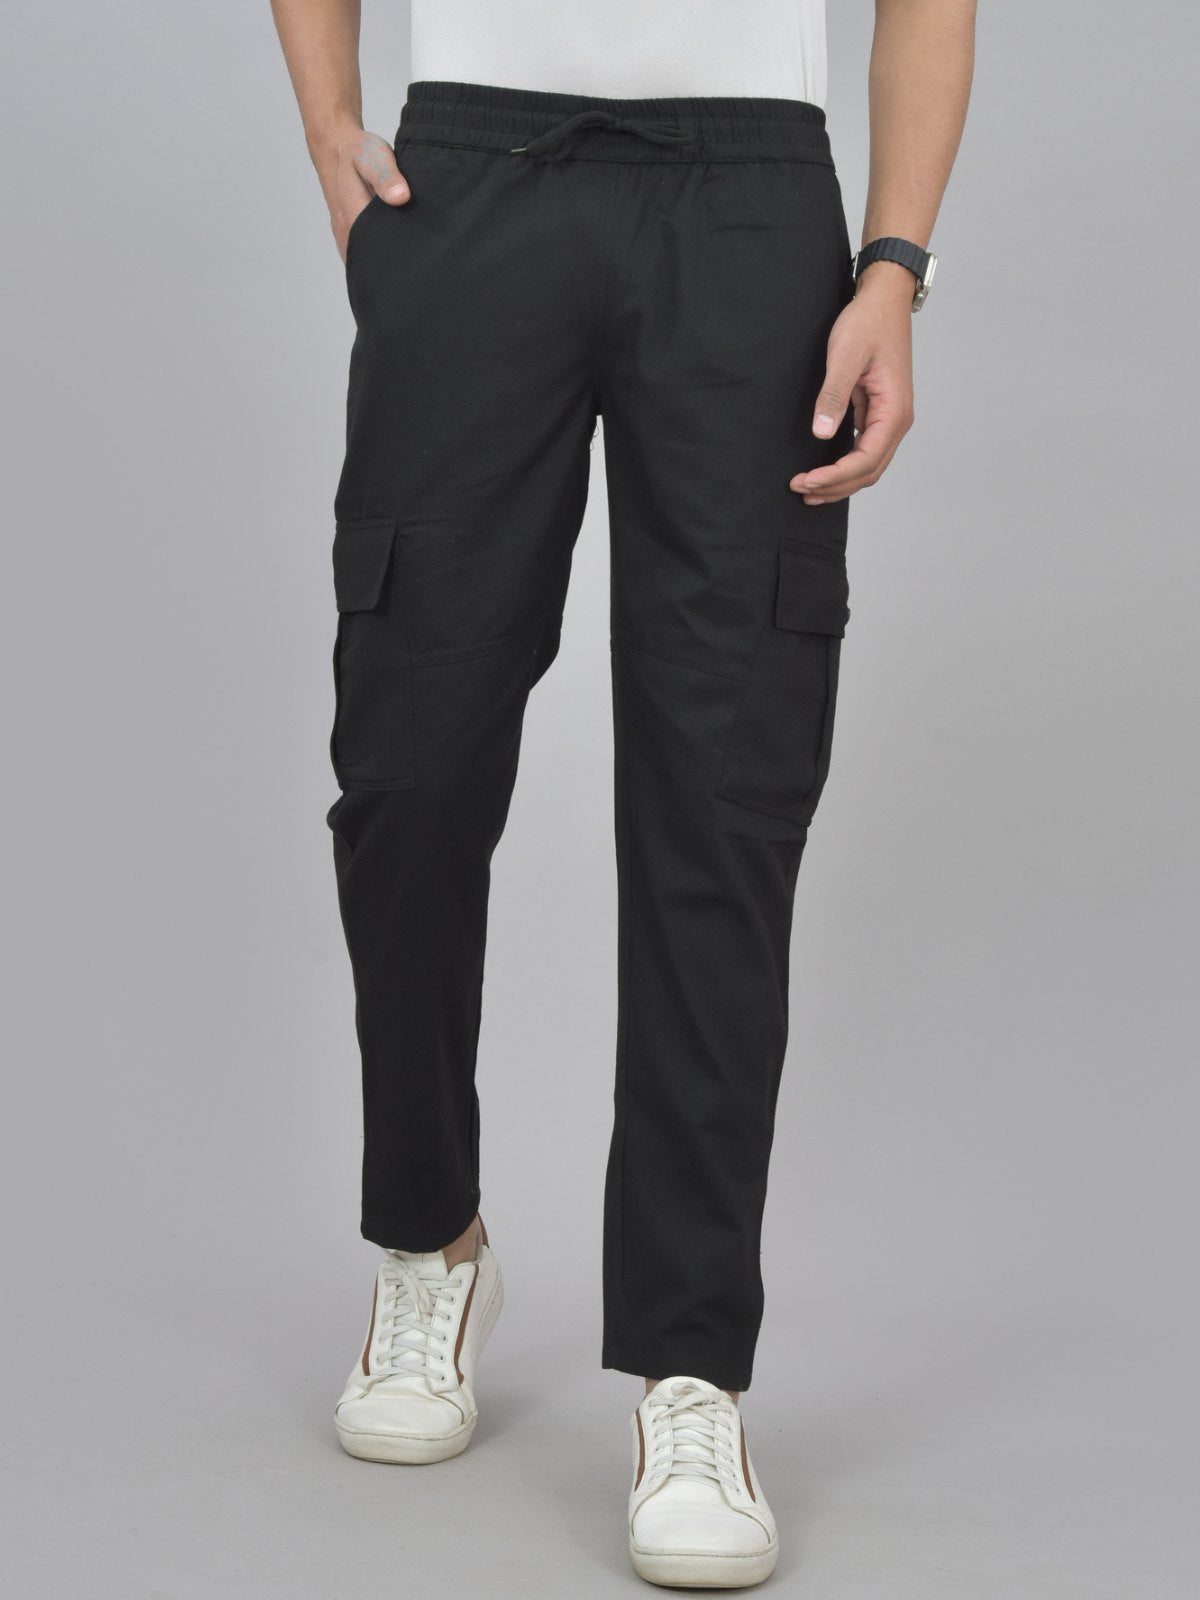 Pack Of 2 Mens Black And Grey Twill Straight Cargo Pants Combo